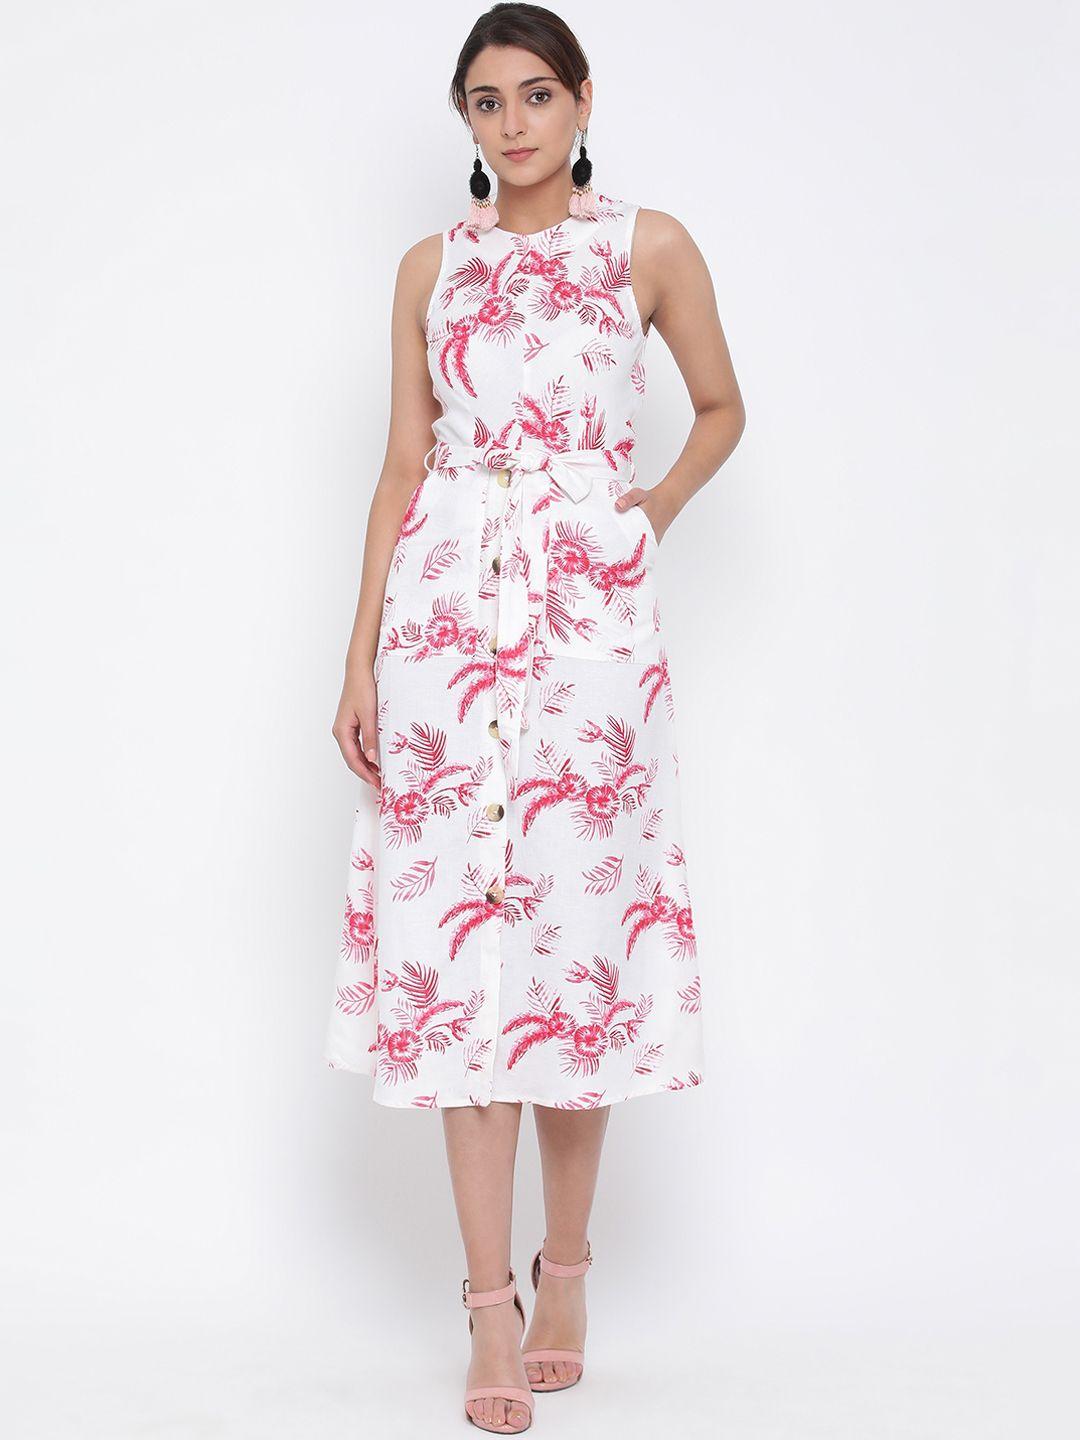 oxolloxo women white & pink printed fit and flare dress